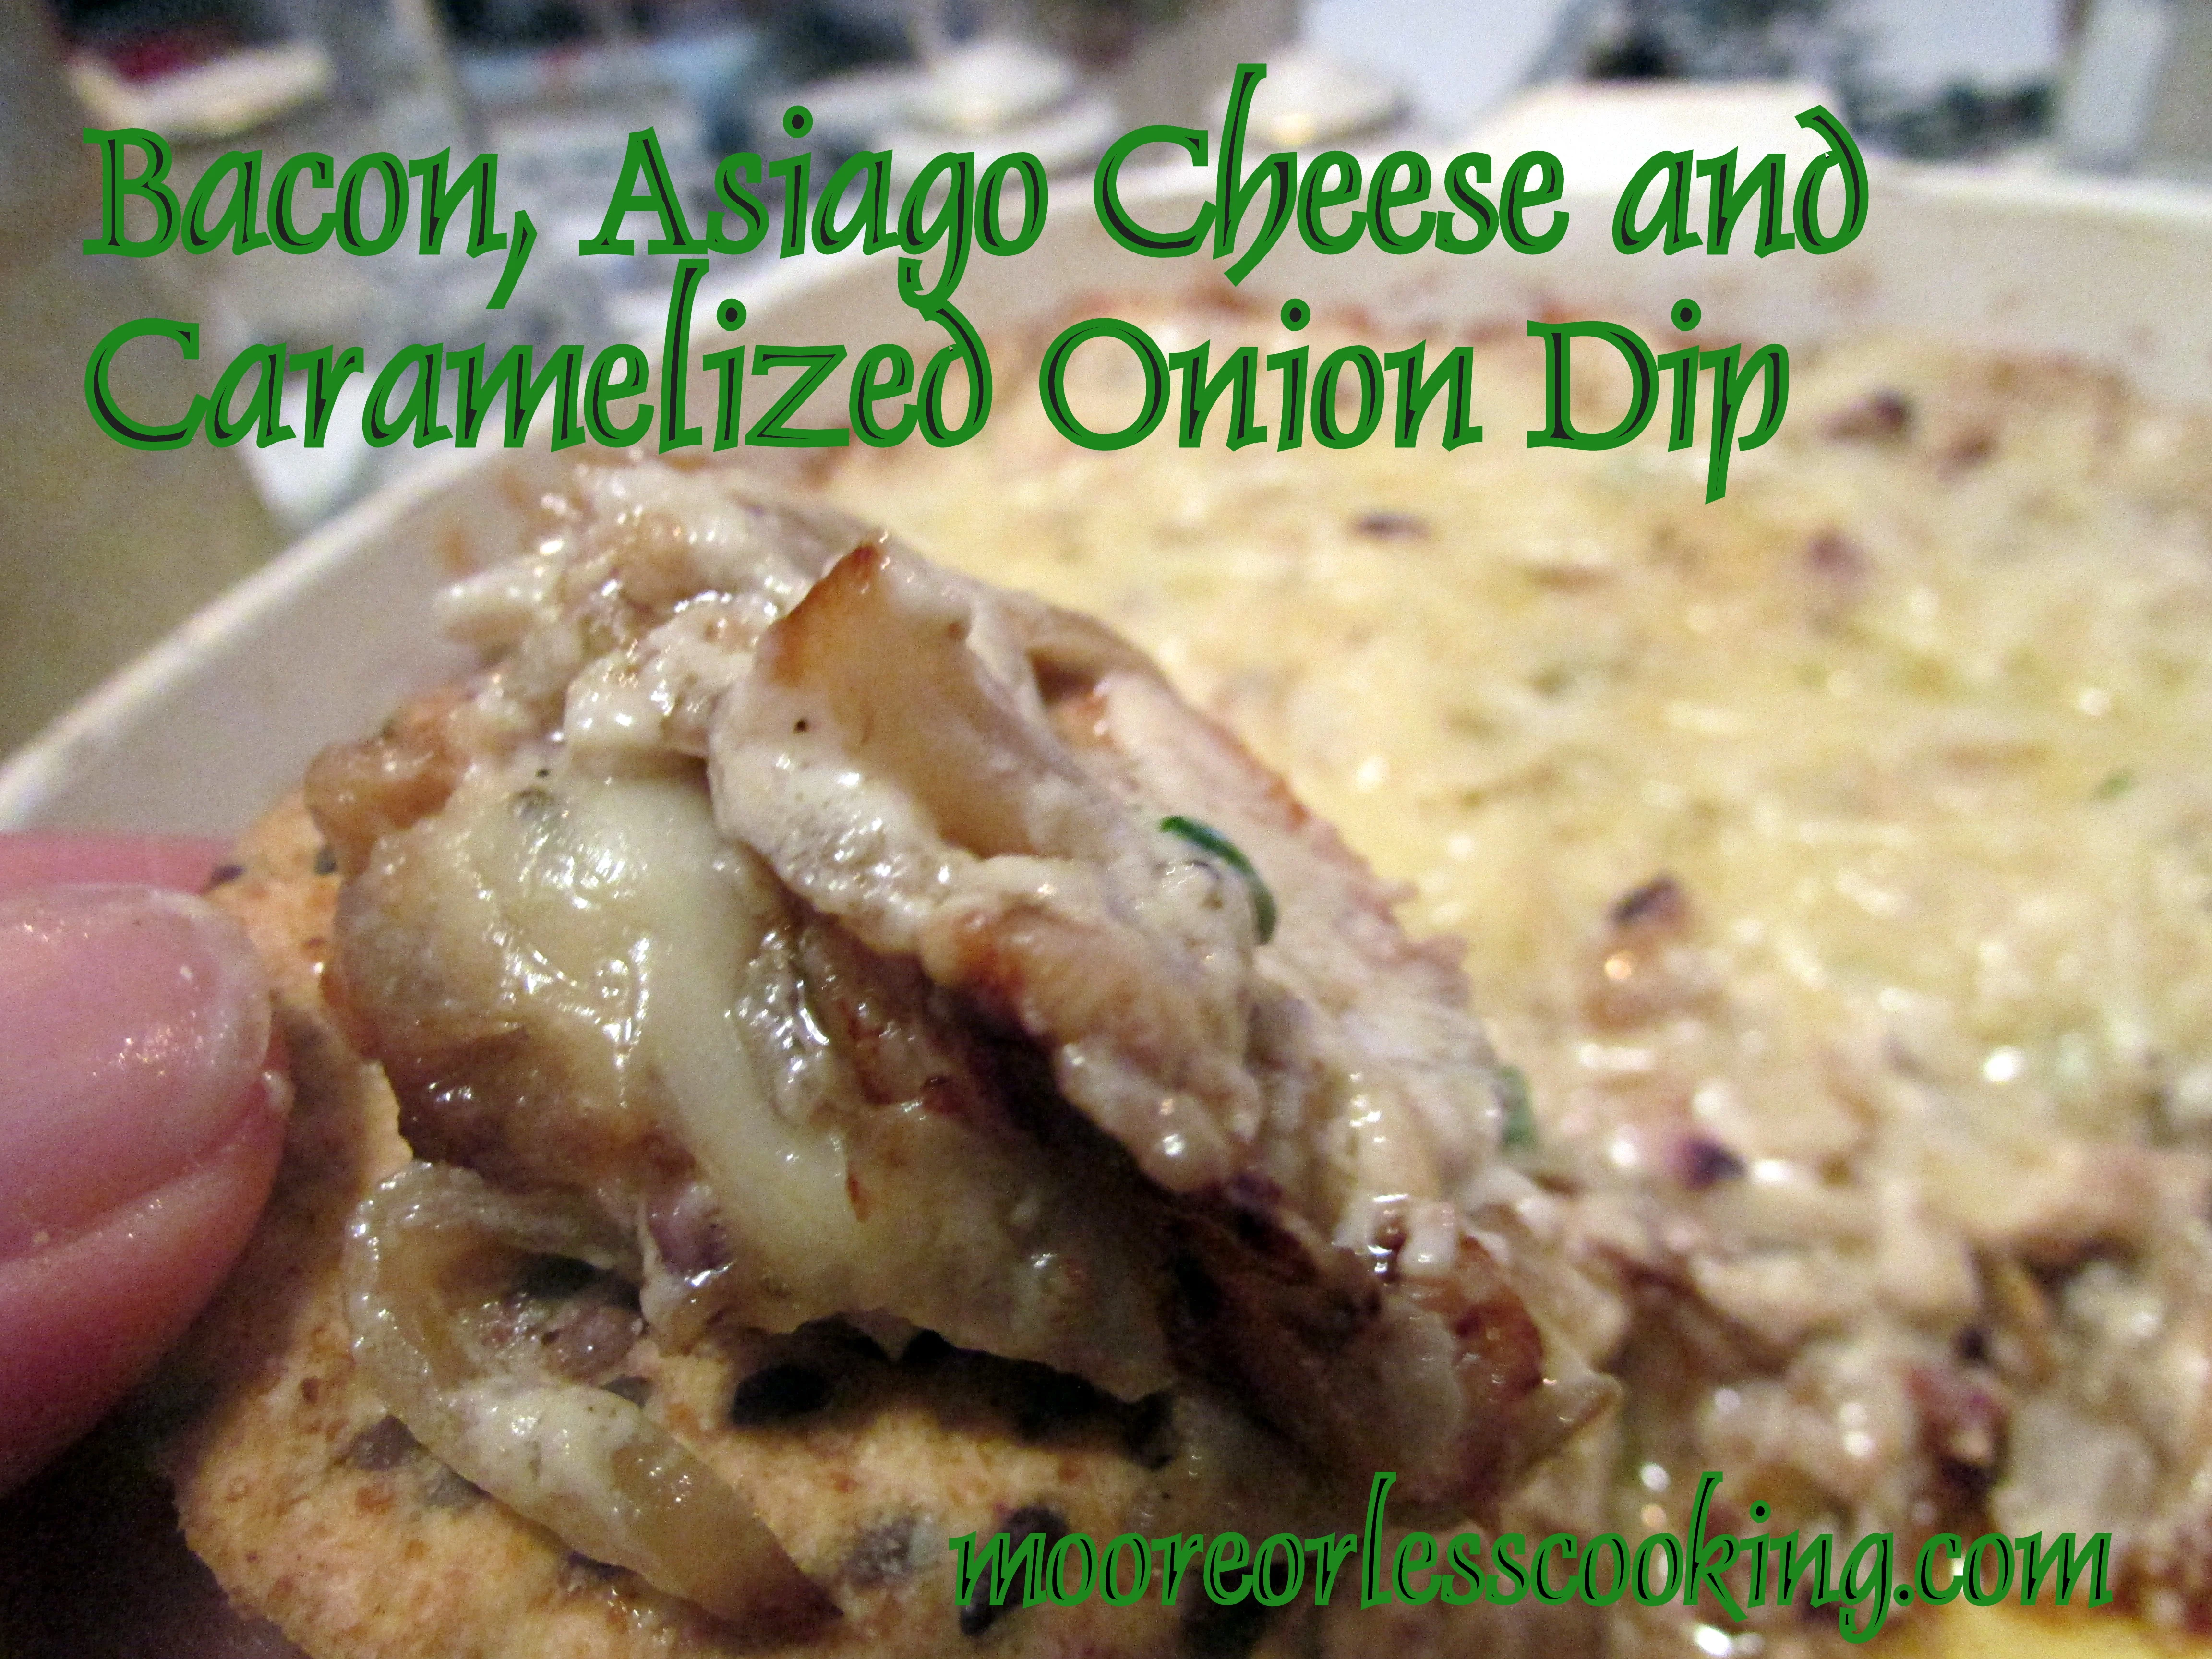 BACON, ASIAGO CHEESE AND CARAMELIZED ONION DIP